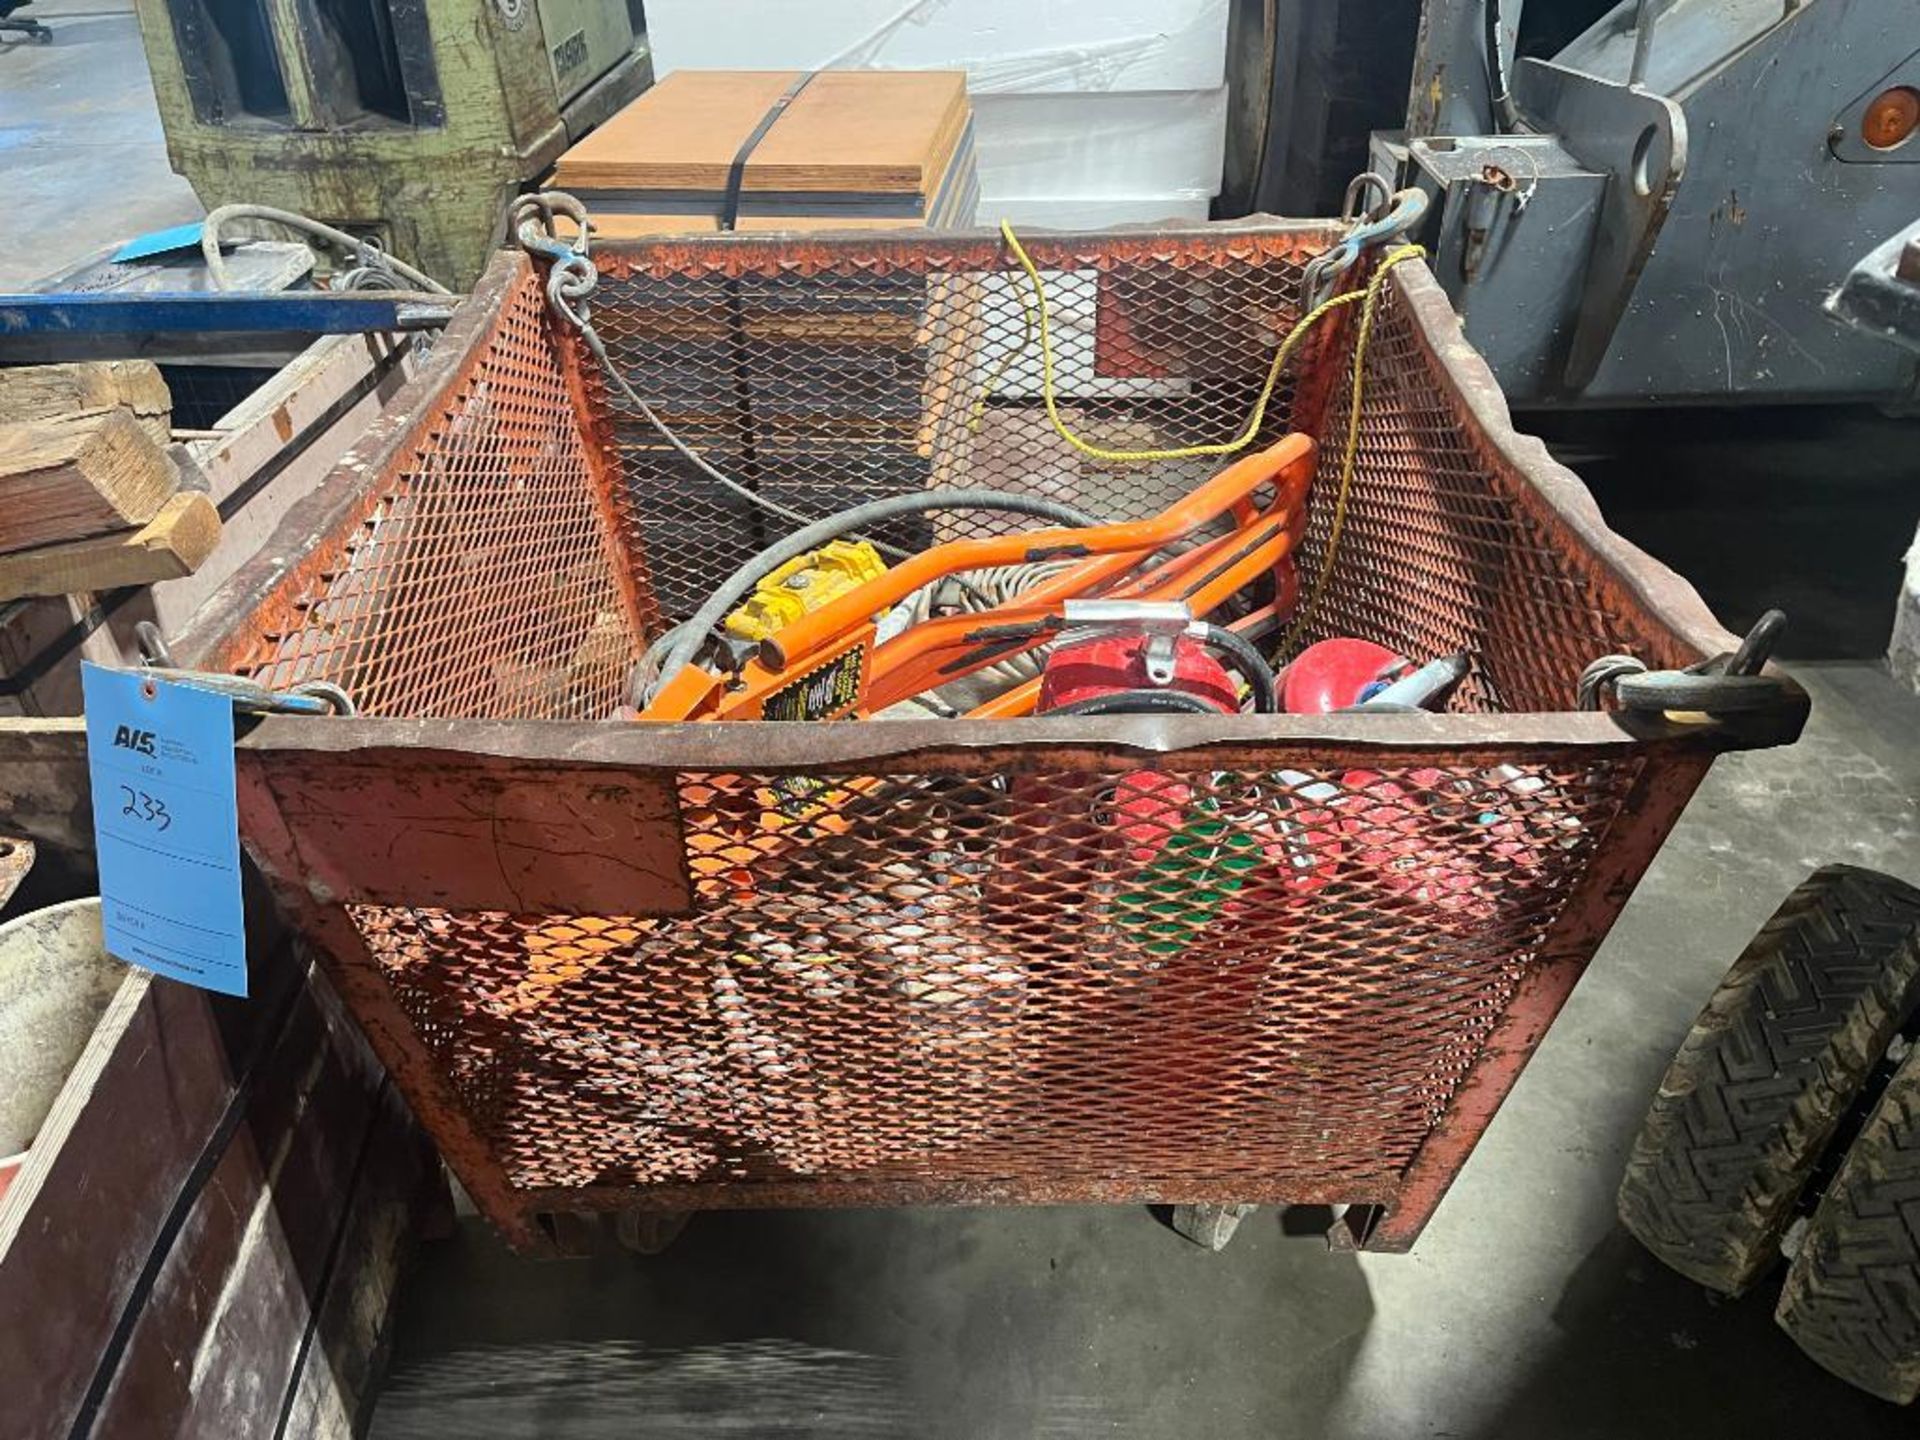 LOT: Metal Hoist Bin containing safety ladder rail extension system with misc. MRO.